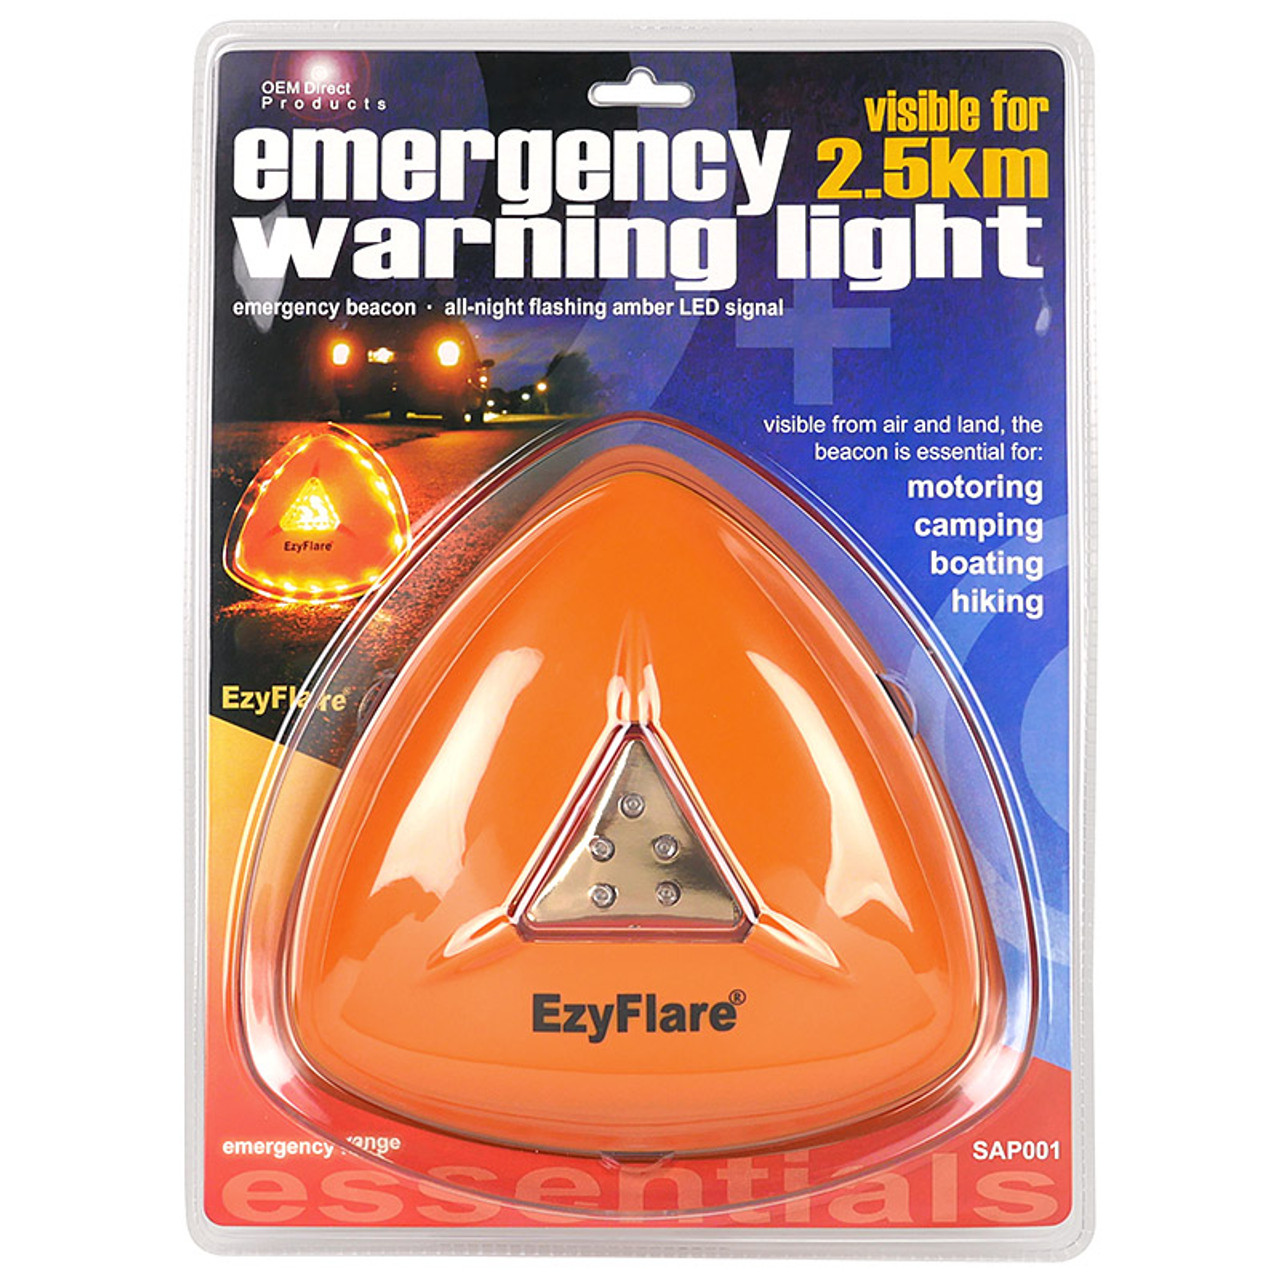 https://cdn11.bigcommerce.com/s-tumf4kk1l4/images/stencil/1280x1280/products/3472/6322/ez-flare-emergency-warning-light-1-mile-visibility-pack-of-2-30__99693.1640715654.jpg?c=1?imbypass=on